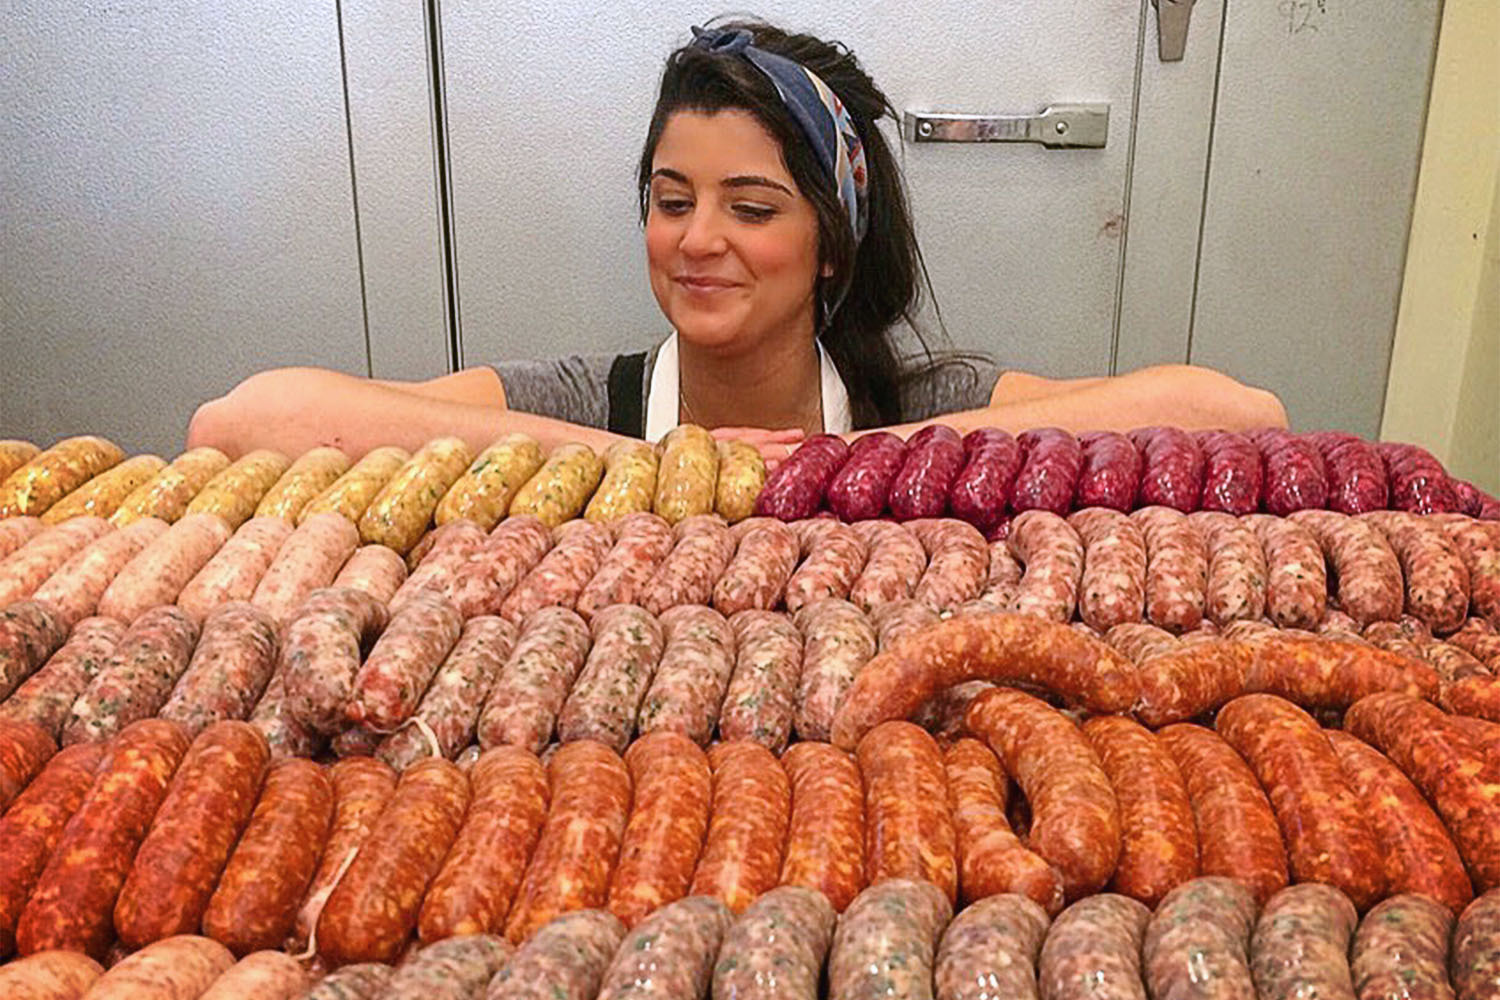 Seemore Meats and Veggies was founded by Cara Nicoletti